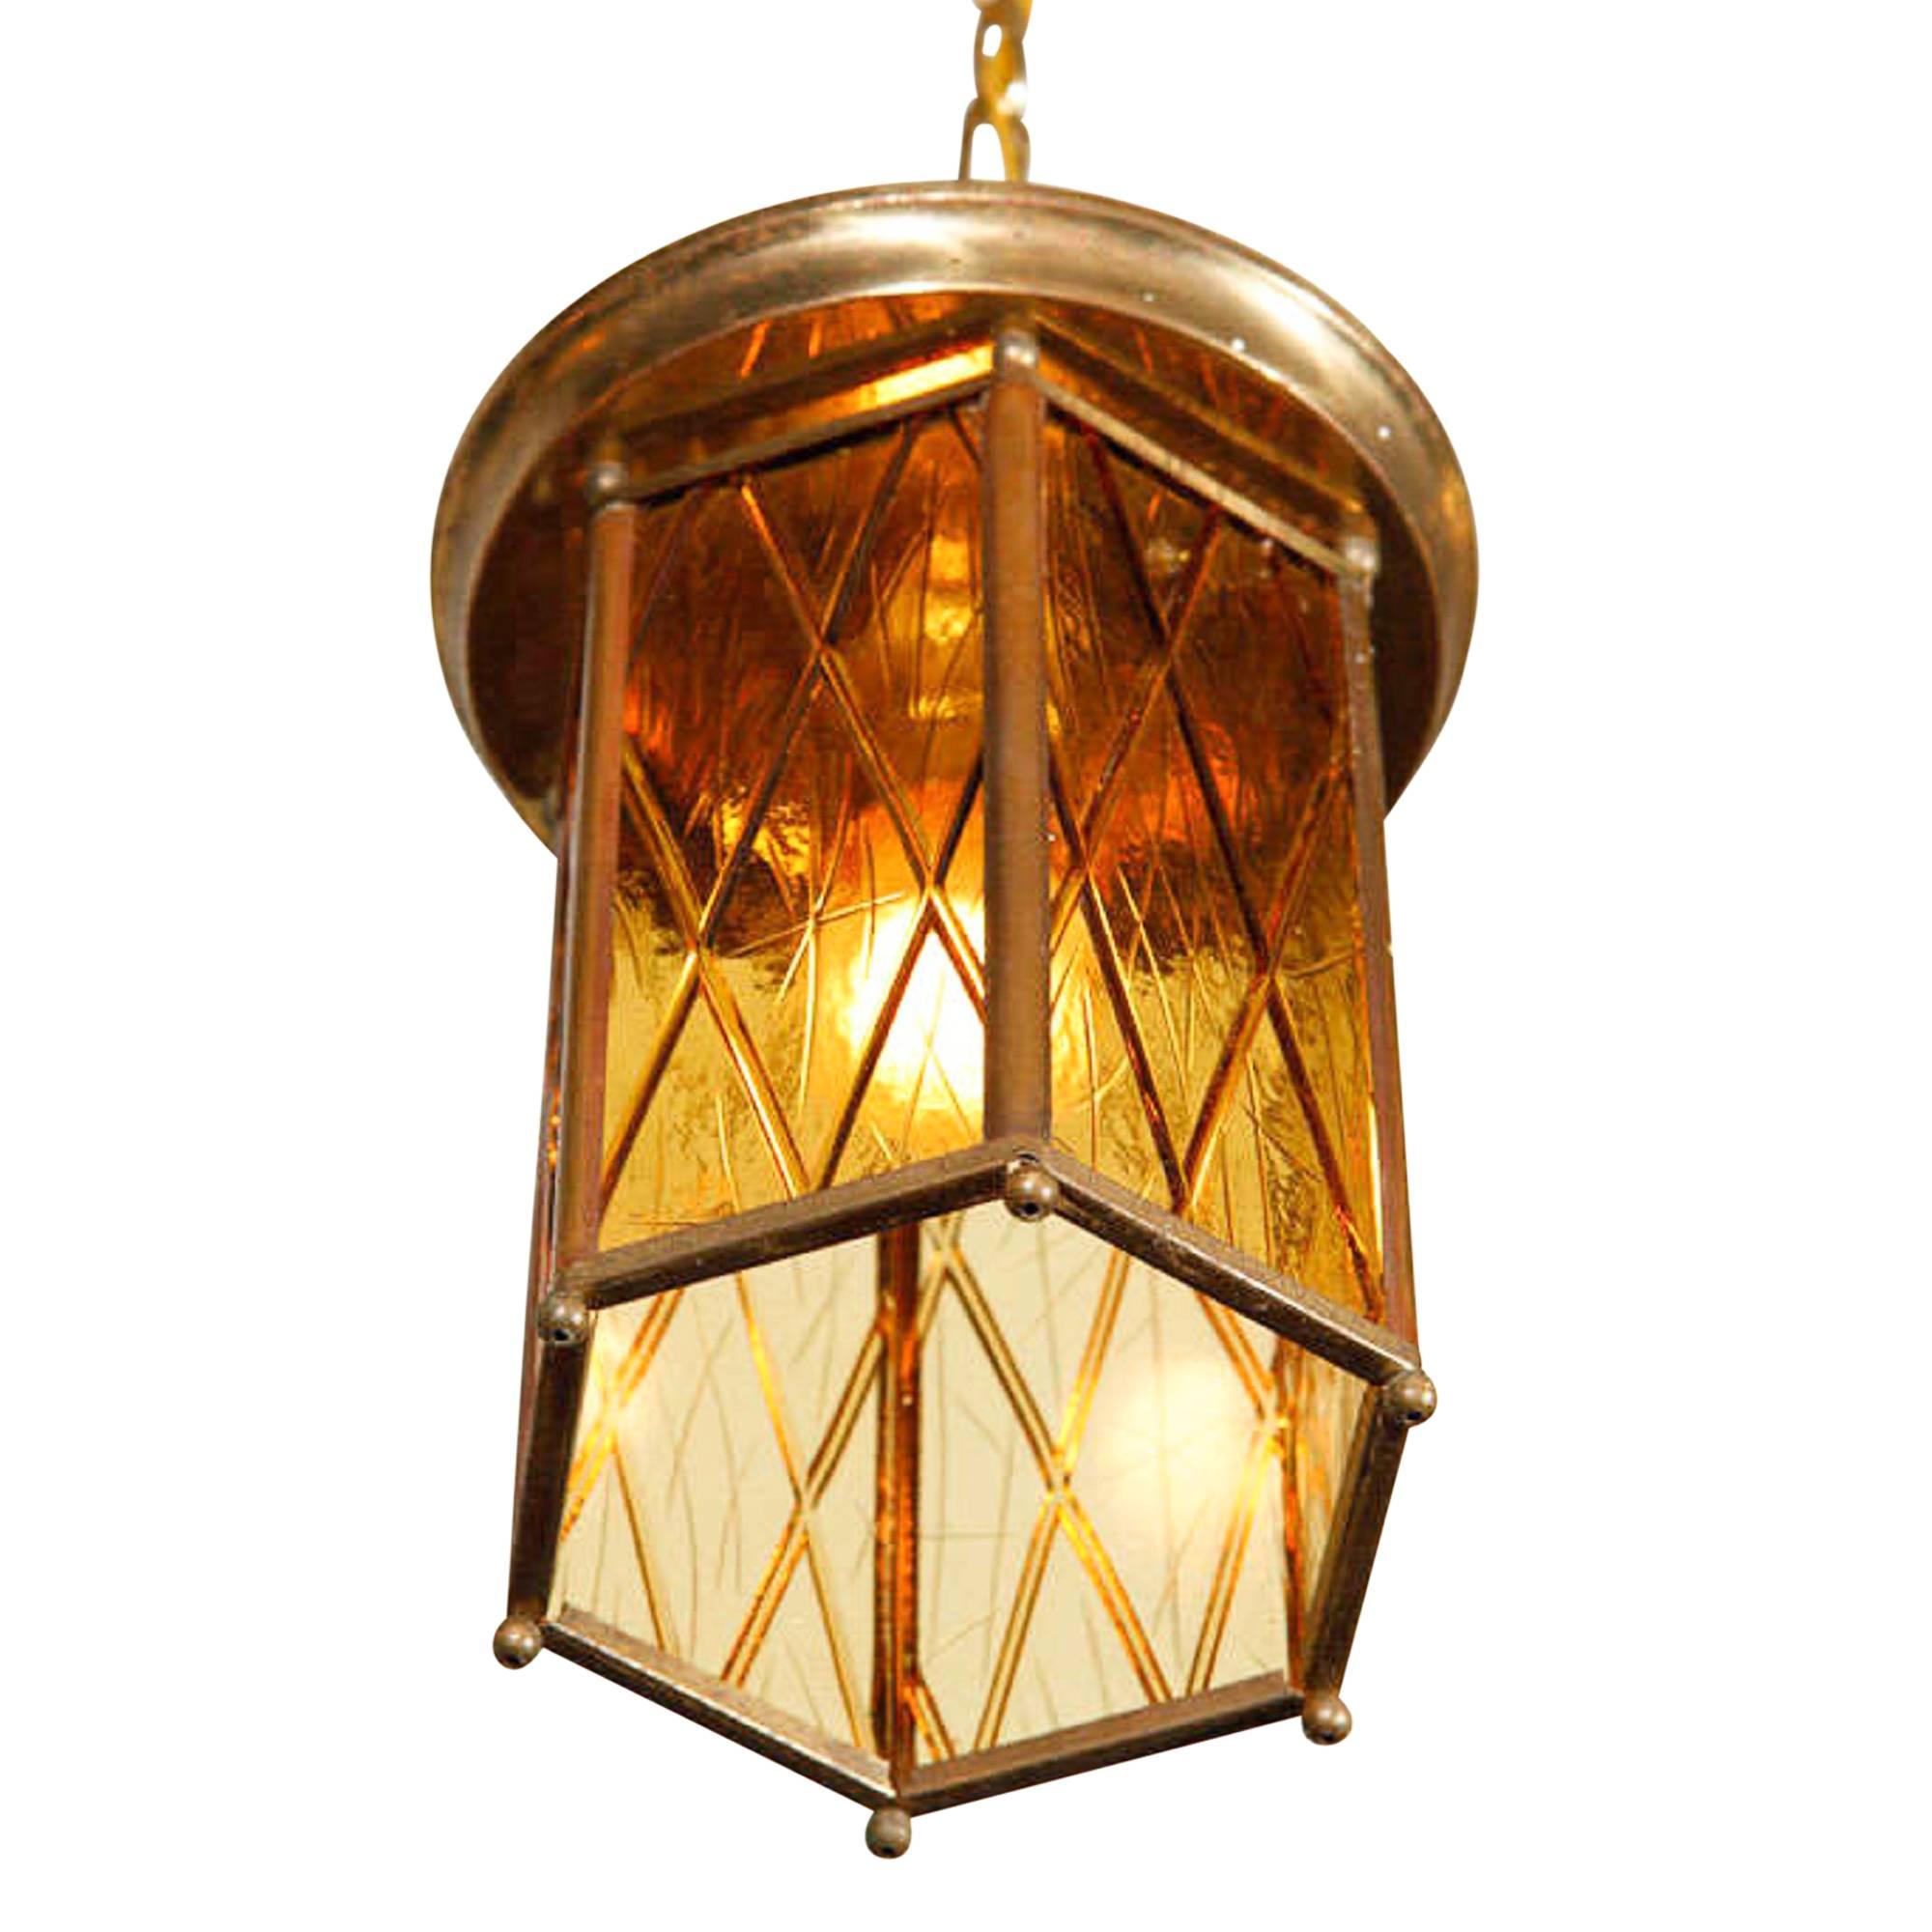 Hanging lamp, the shade composed of amber tinted glass with cross-hatch pattern, set into a bronze frame, Germany, 1920s. Suspended by a chain from the ceiling canopy. Width of fixture 7 inches, height of fixture 8 1/4 in. 